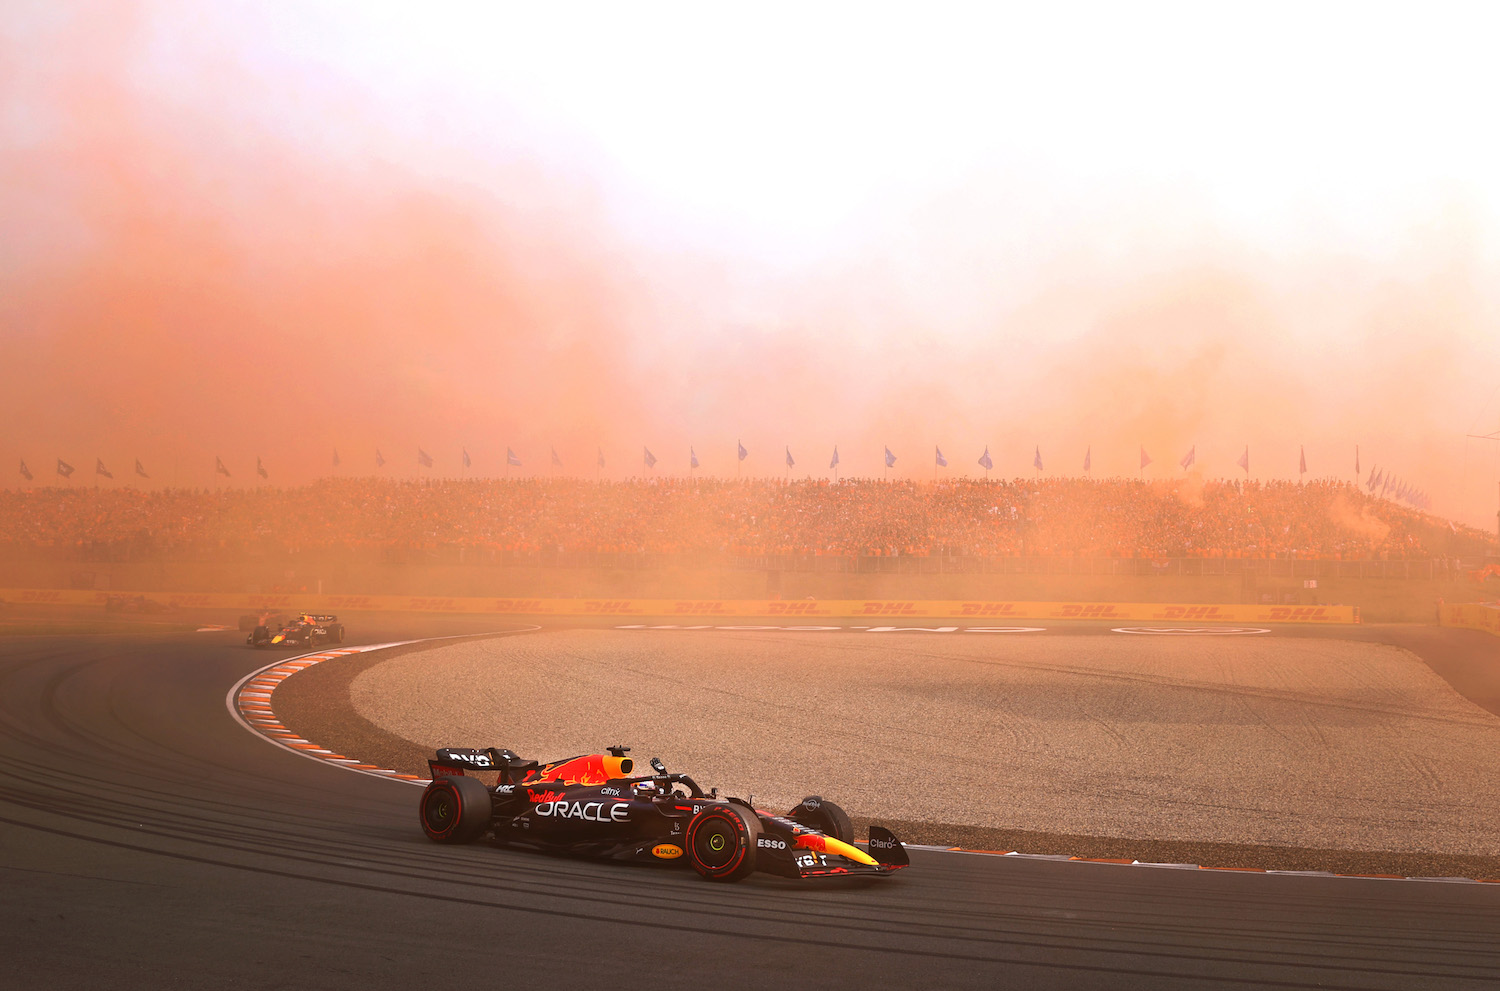 Max Verstappen's Red Bull Racing Formula 1 car takes a victory lap after the Netherlands Grand Prix.